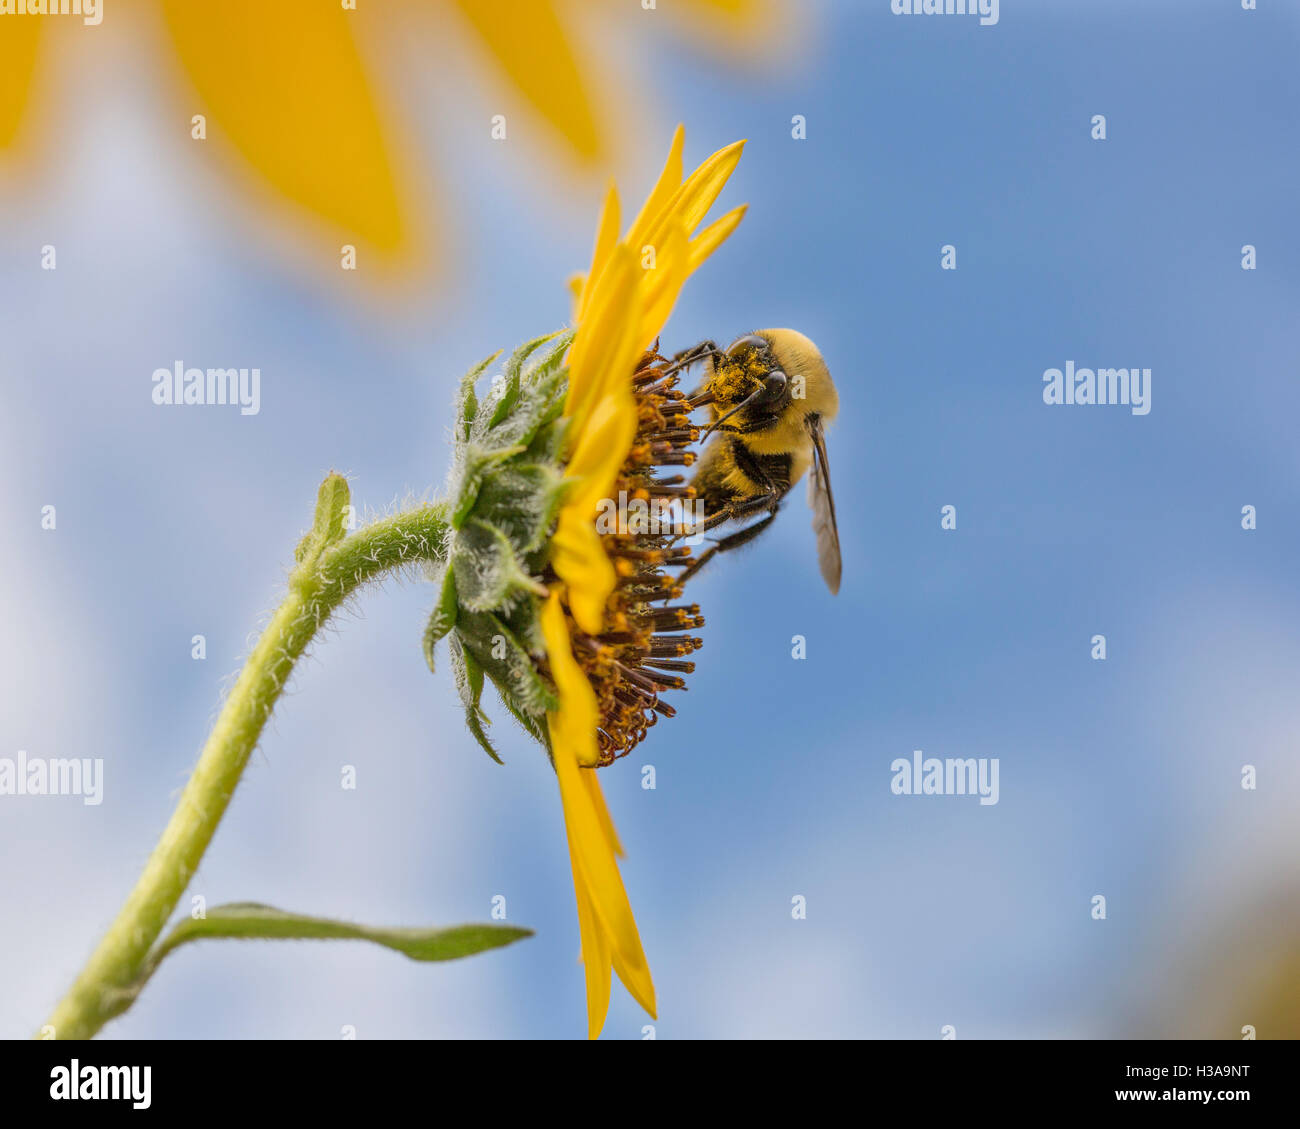 A Honey Bee Collecting Pollen From A Sunflower Stock Photo